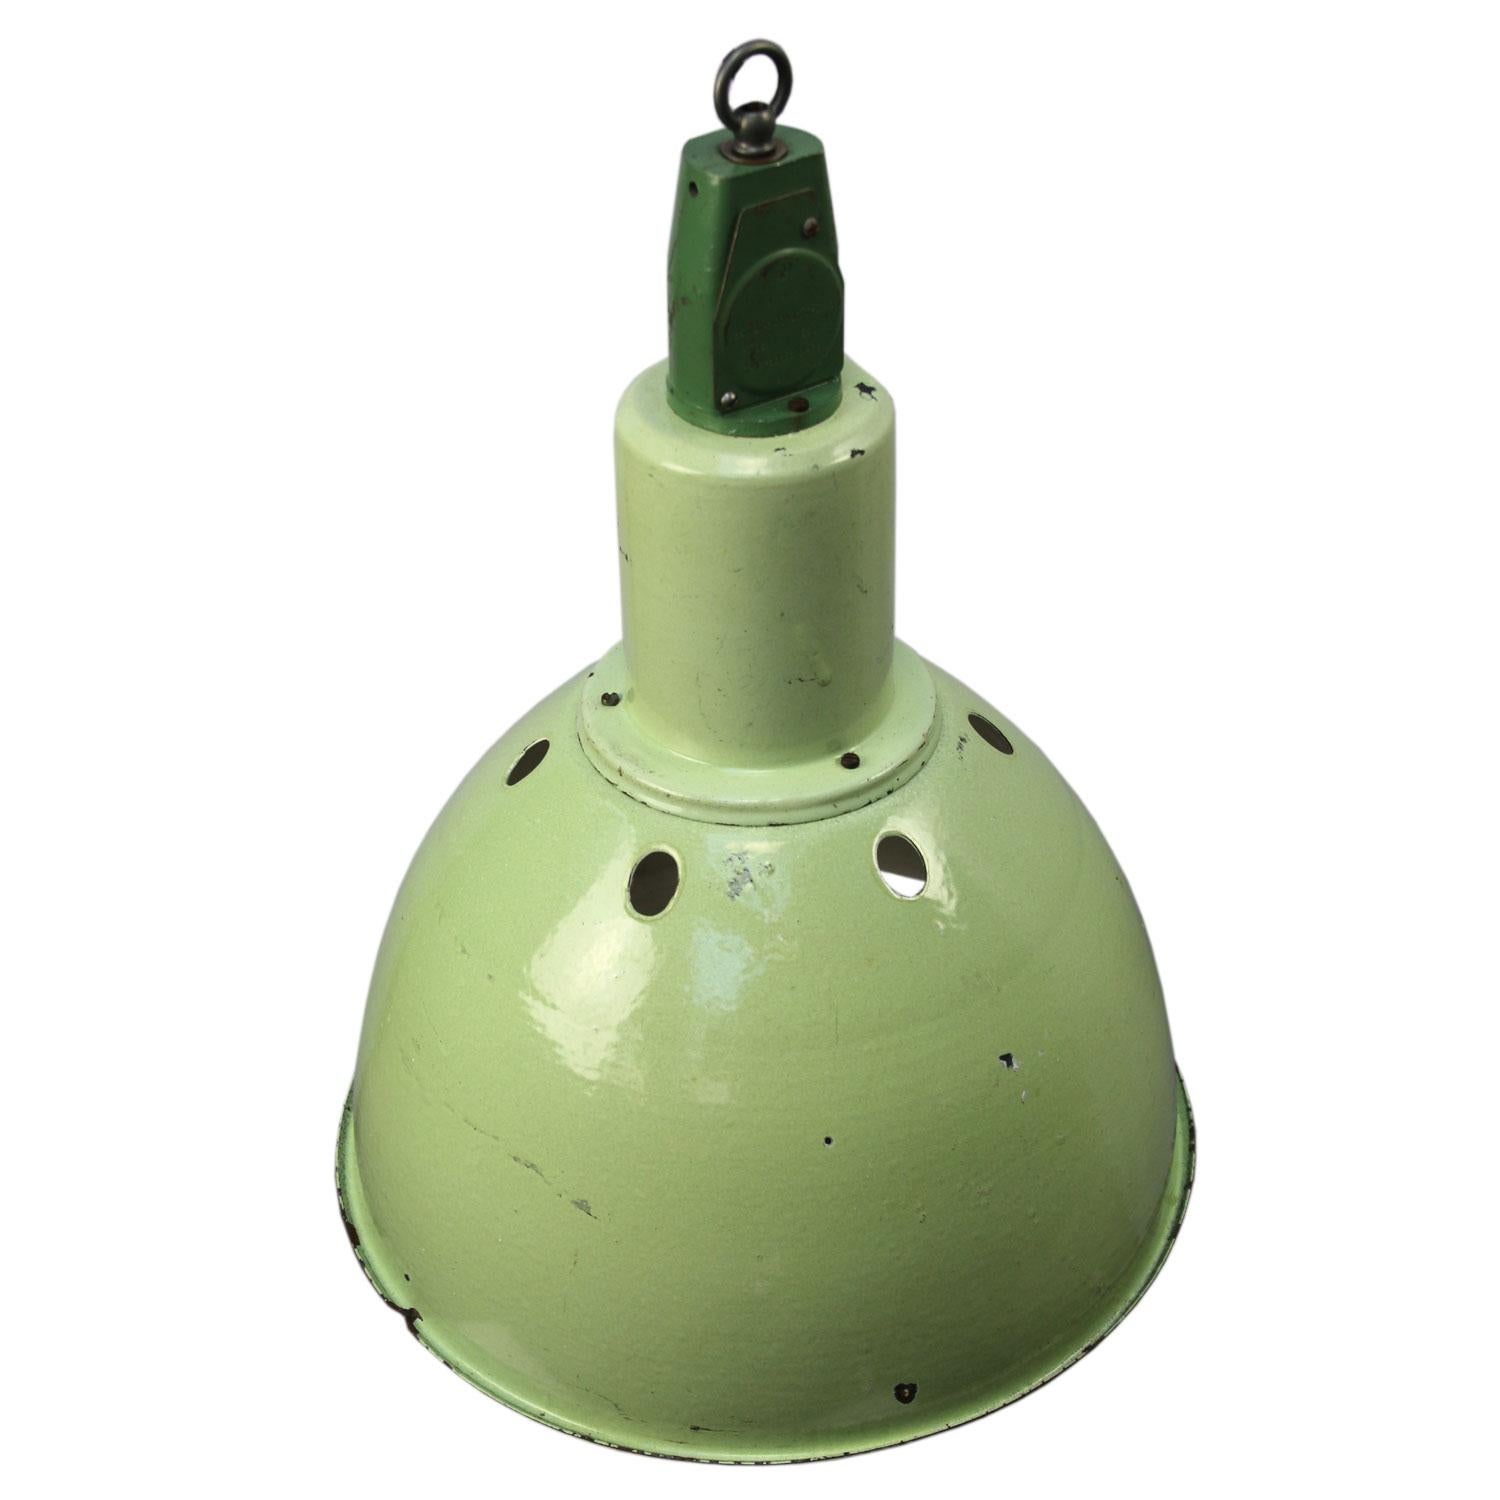 Enamel Industrial pendant
Light green enamel shade, white inside.
Dark green cast aluminium top

Weight: 2.70 kg / 6 lb

Priced per individual item. All lamps have been made suitable by international standards for incandescent light bulbs,